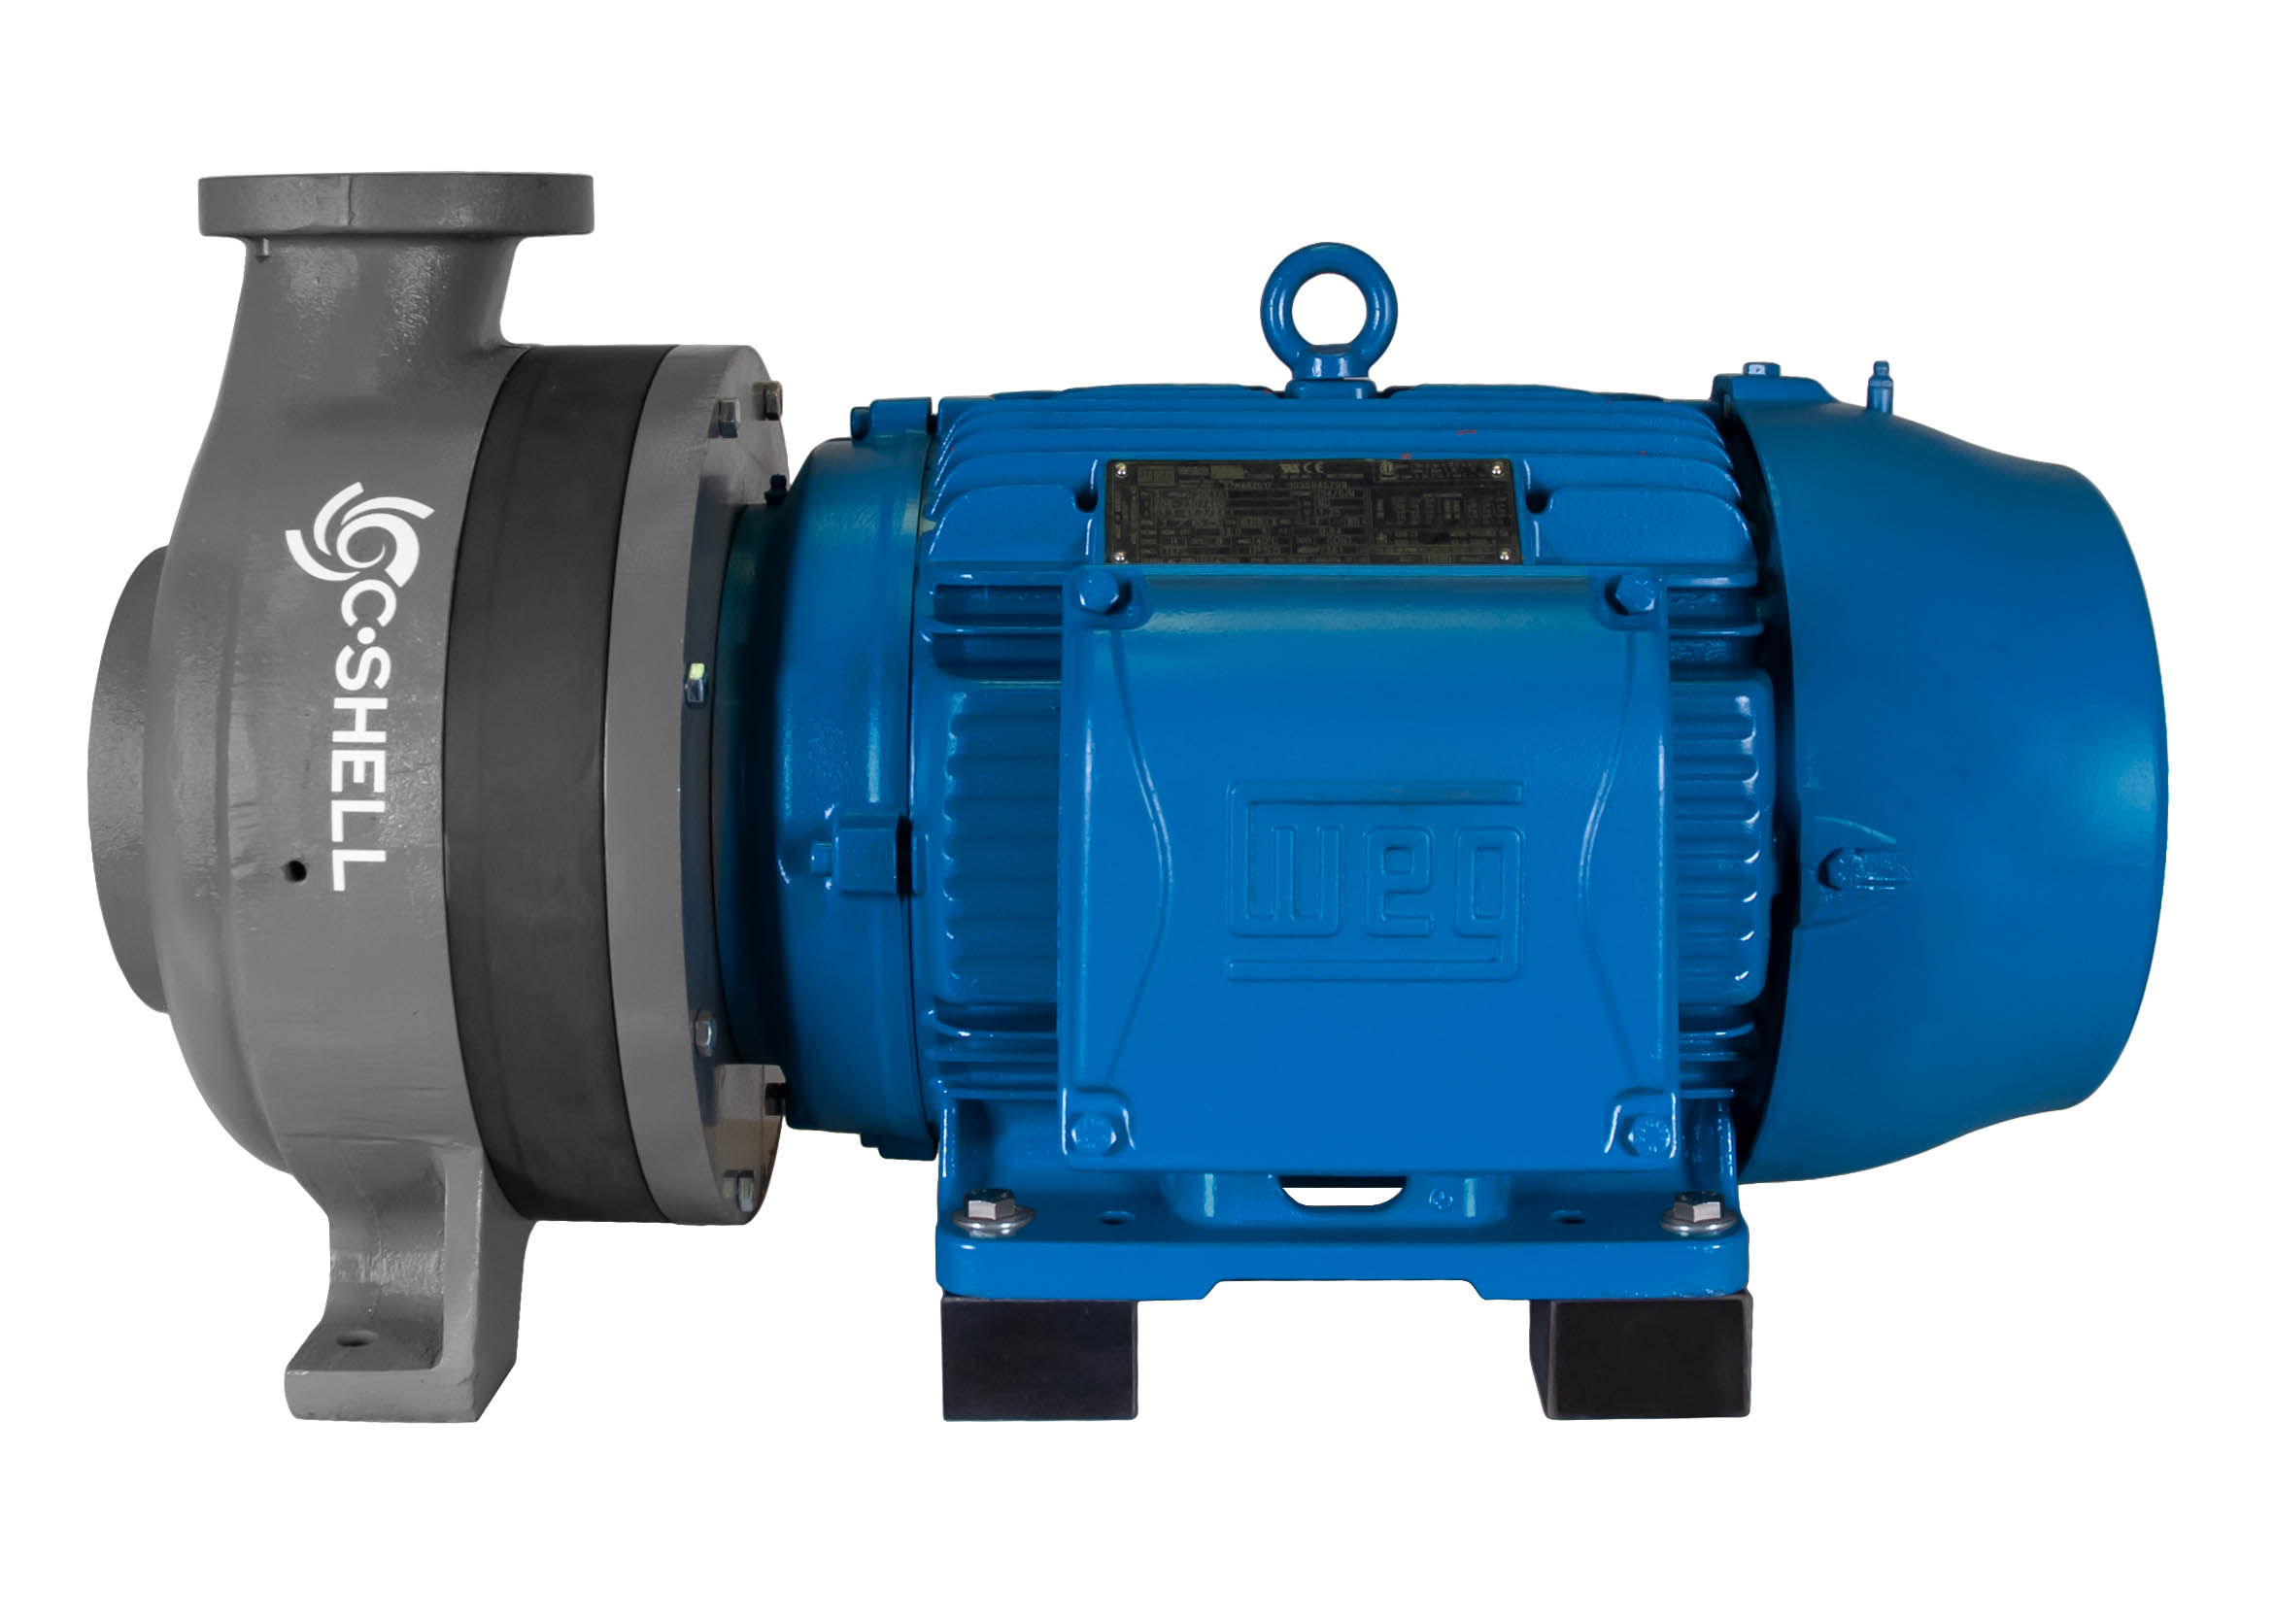 C-Shell 3x2-10 Pump with blue WEG Motor right side view